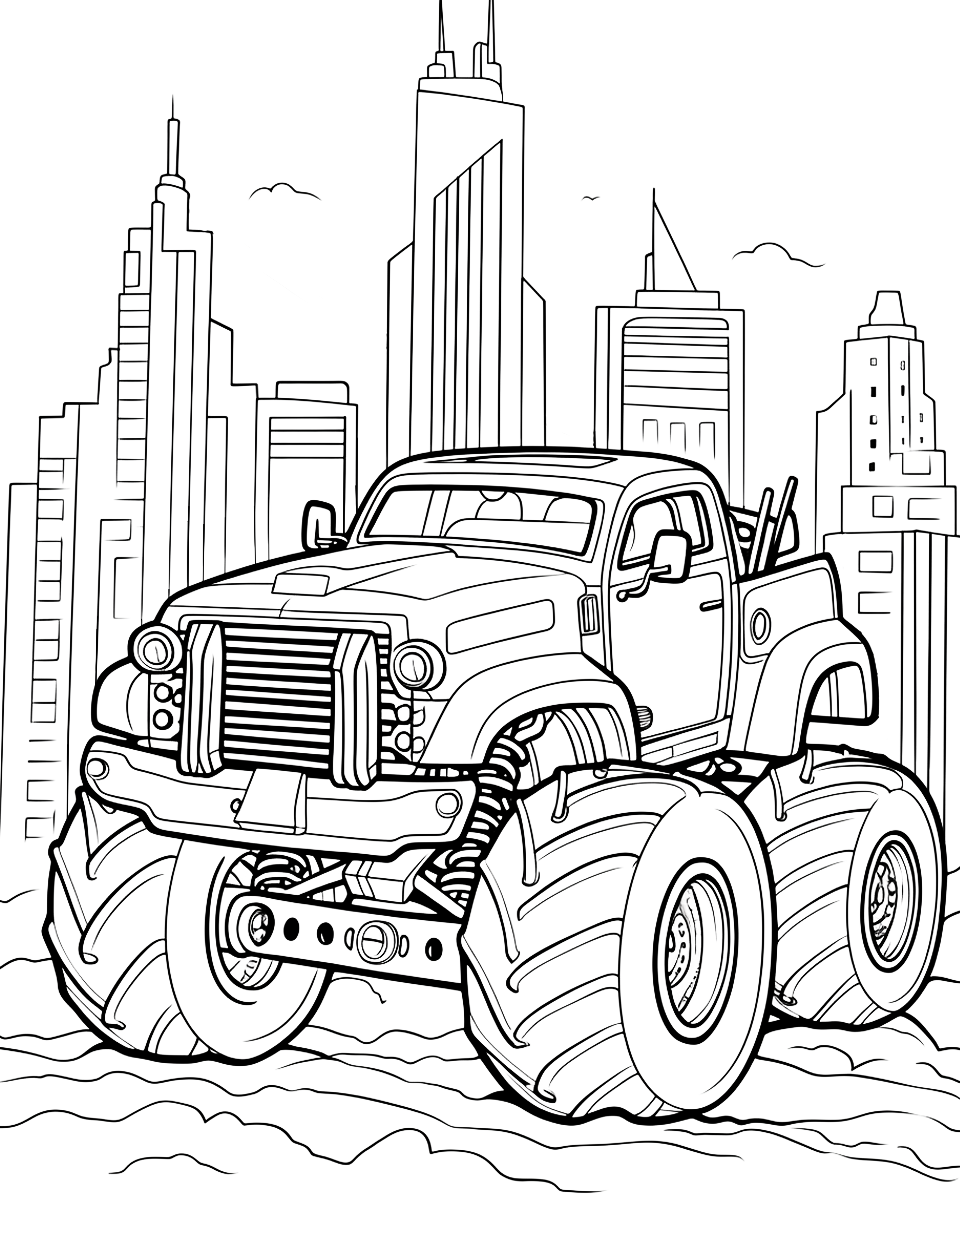 City's Monster Truck Coloring Page - A city’s own themed monster truck for league racing.